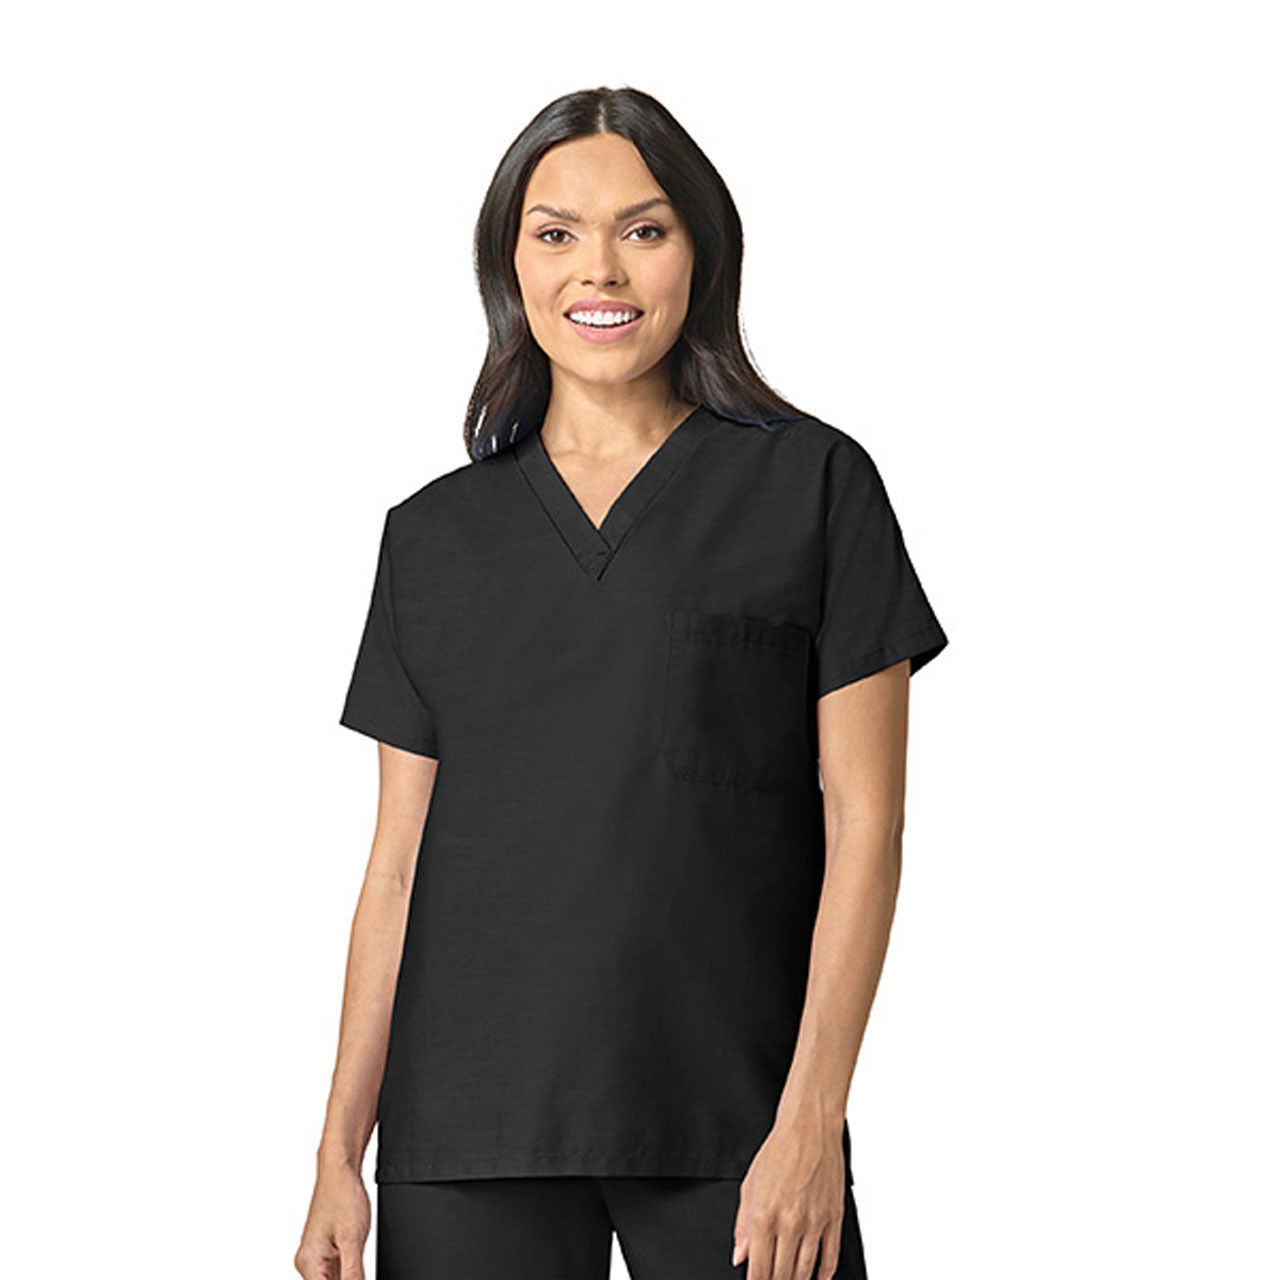 Can I wear the Black Scrub Tops in different situations?